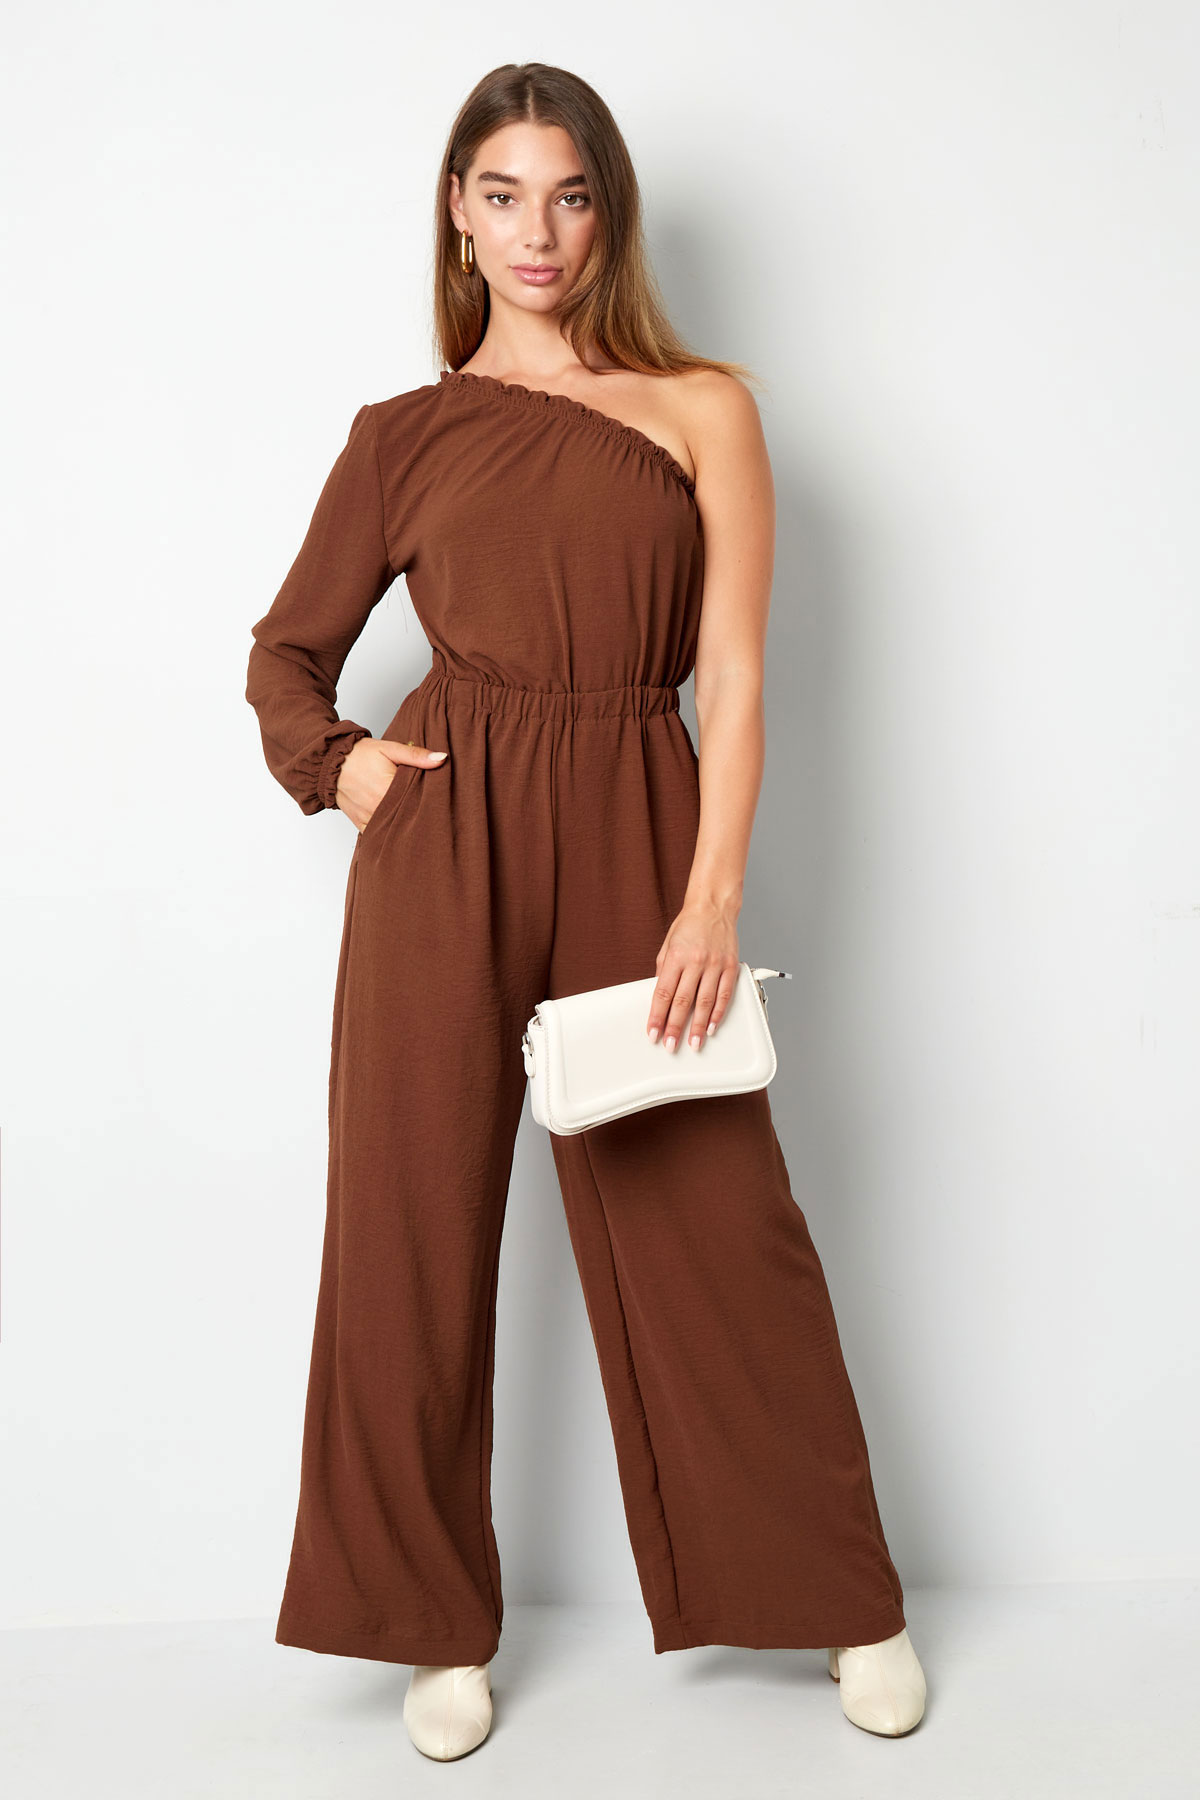 Jumpsuit one-shoulder - mustard yellow Picture6